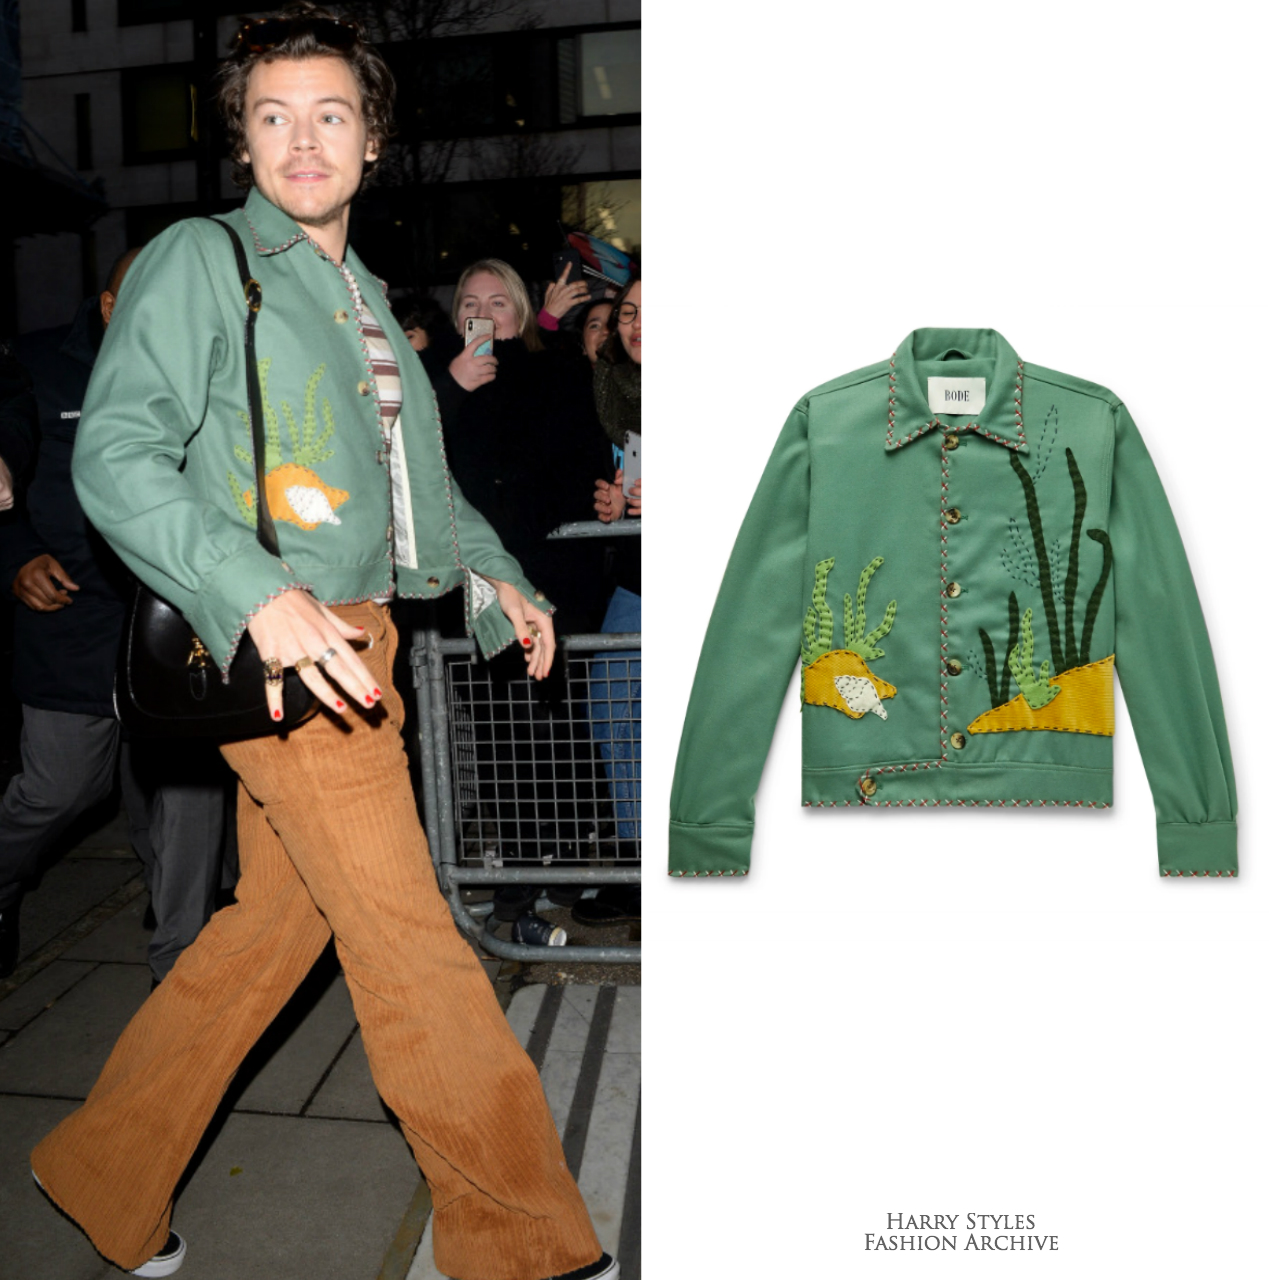 Harry Styles Fashion Archive on X: Harry rewore this jacket in a